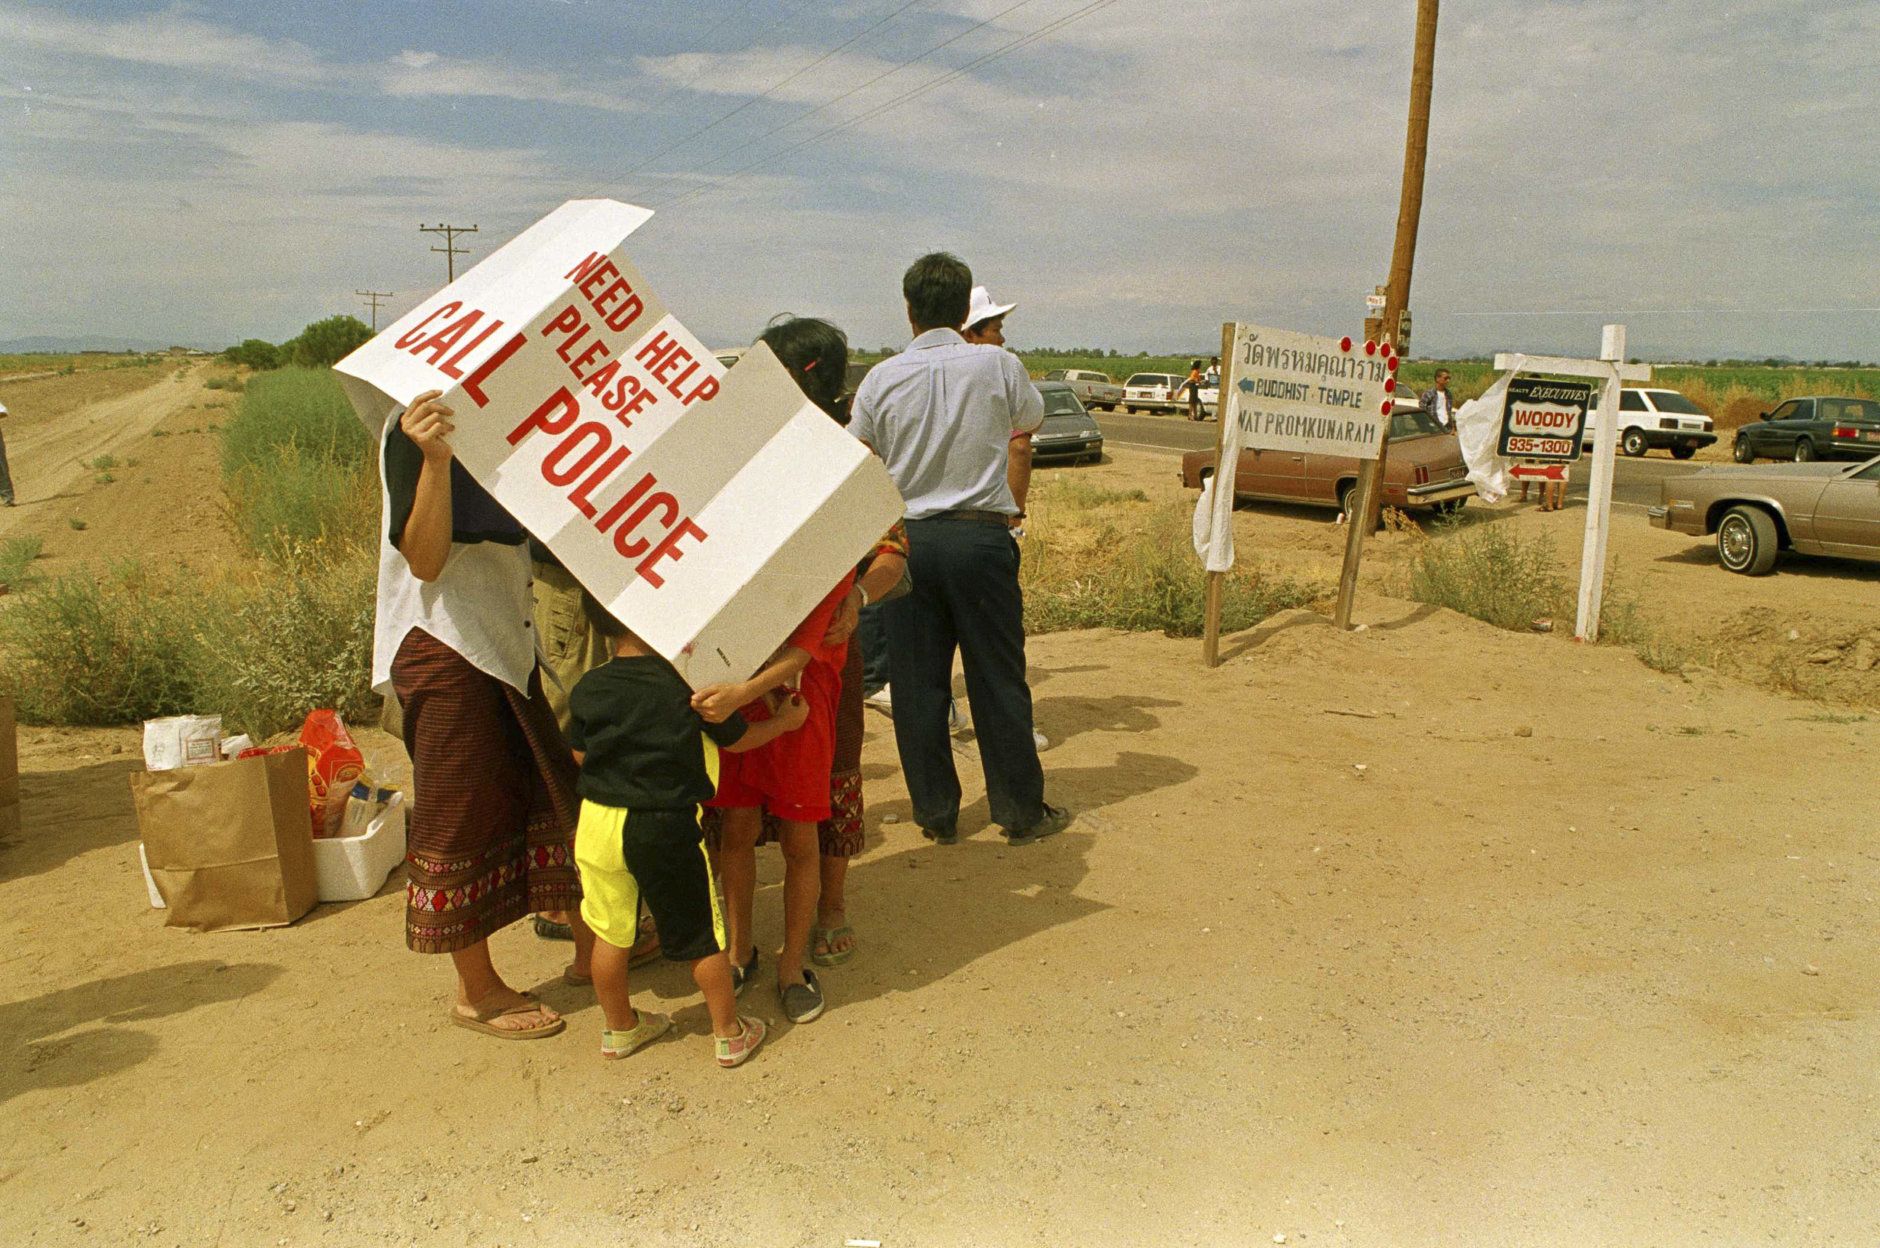 Trying to avoid the 100+ degree heat, a group of people hide under a windshield sun shade in west Phoenix, Arizona on August 10, 1991, hoping to receive word about nine people who were found slain at a Buddhist temple. Seven of those killed were Buddhist monks. (AP Photo/Scott Troganos)